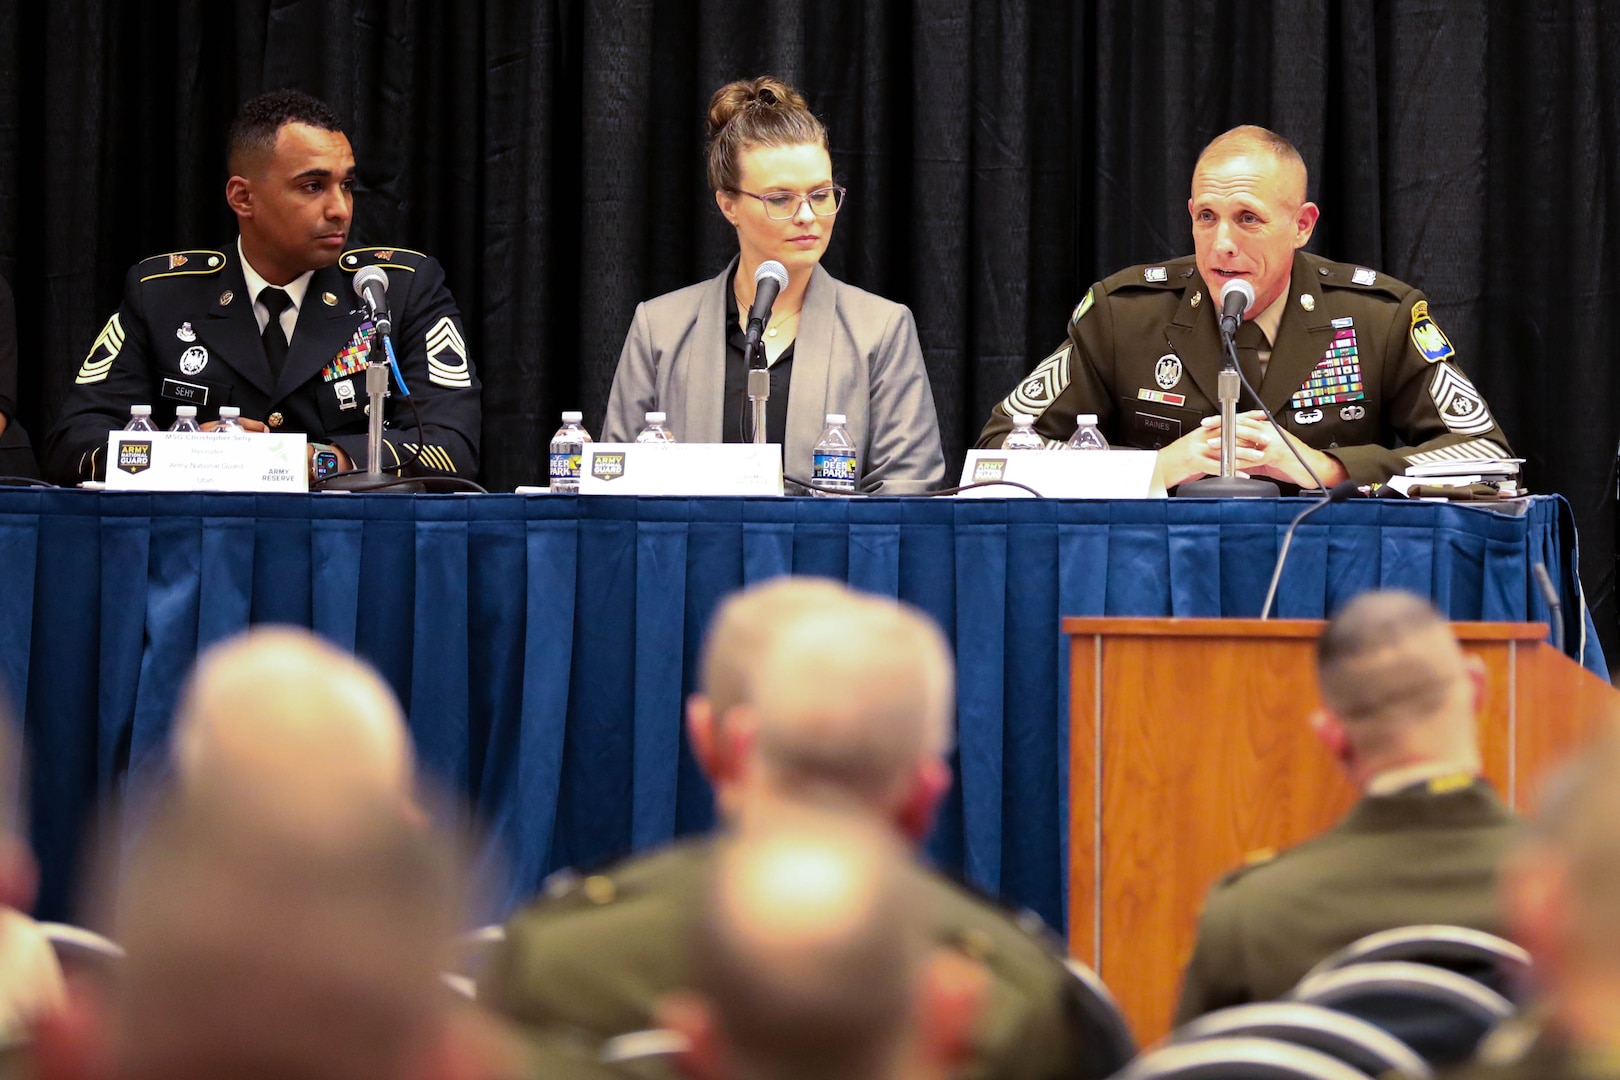 Command Sgt. Maj. John Raines, the senior enlisted leader of the Army National Guard, discusses how “Be All You Can Be” motivated him to join the U.S. Army. Raines led a panel alongside U.S. Army Reserve Command Sgt. Maj. Andrew Lombardo Oct. 9, 2023, at the AUSA 2023 Annual Meeting and Exposition.